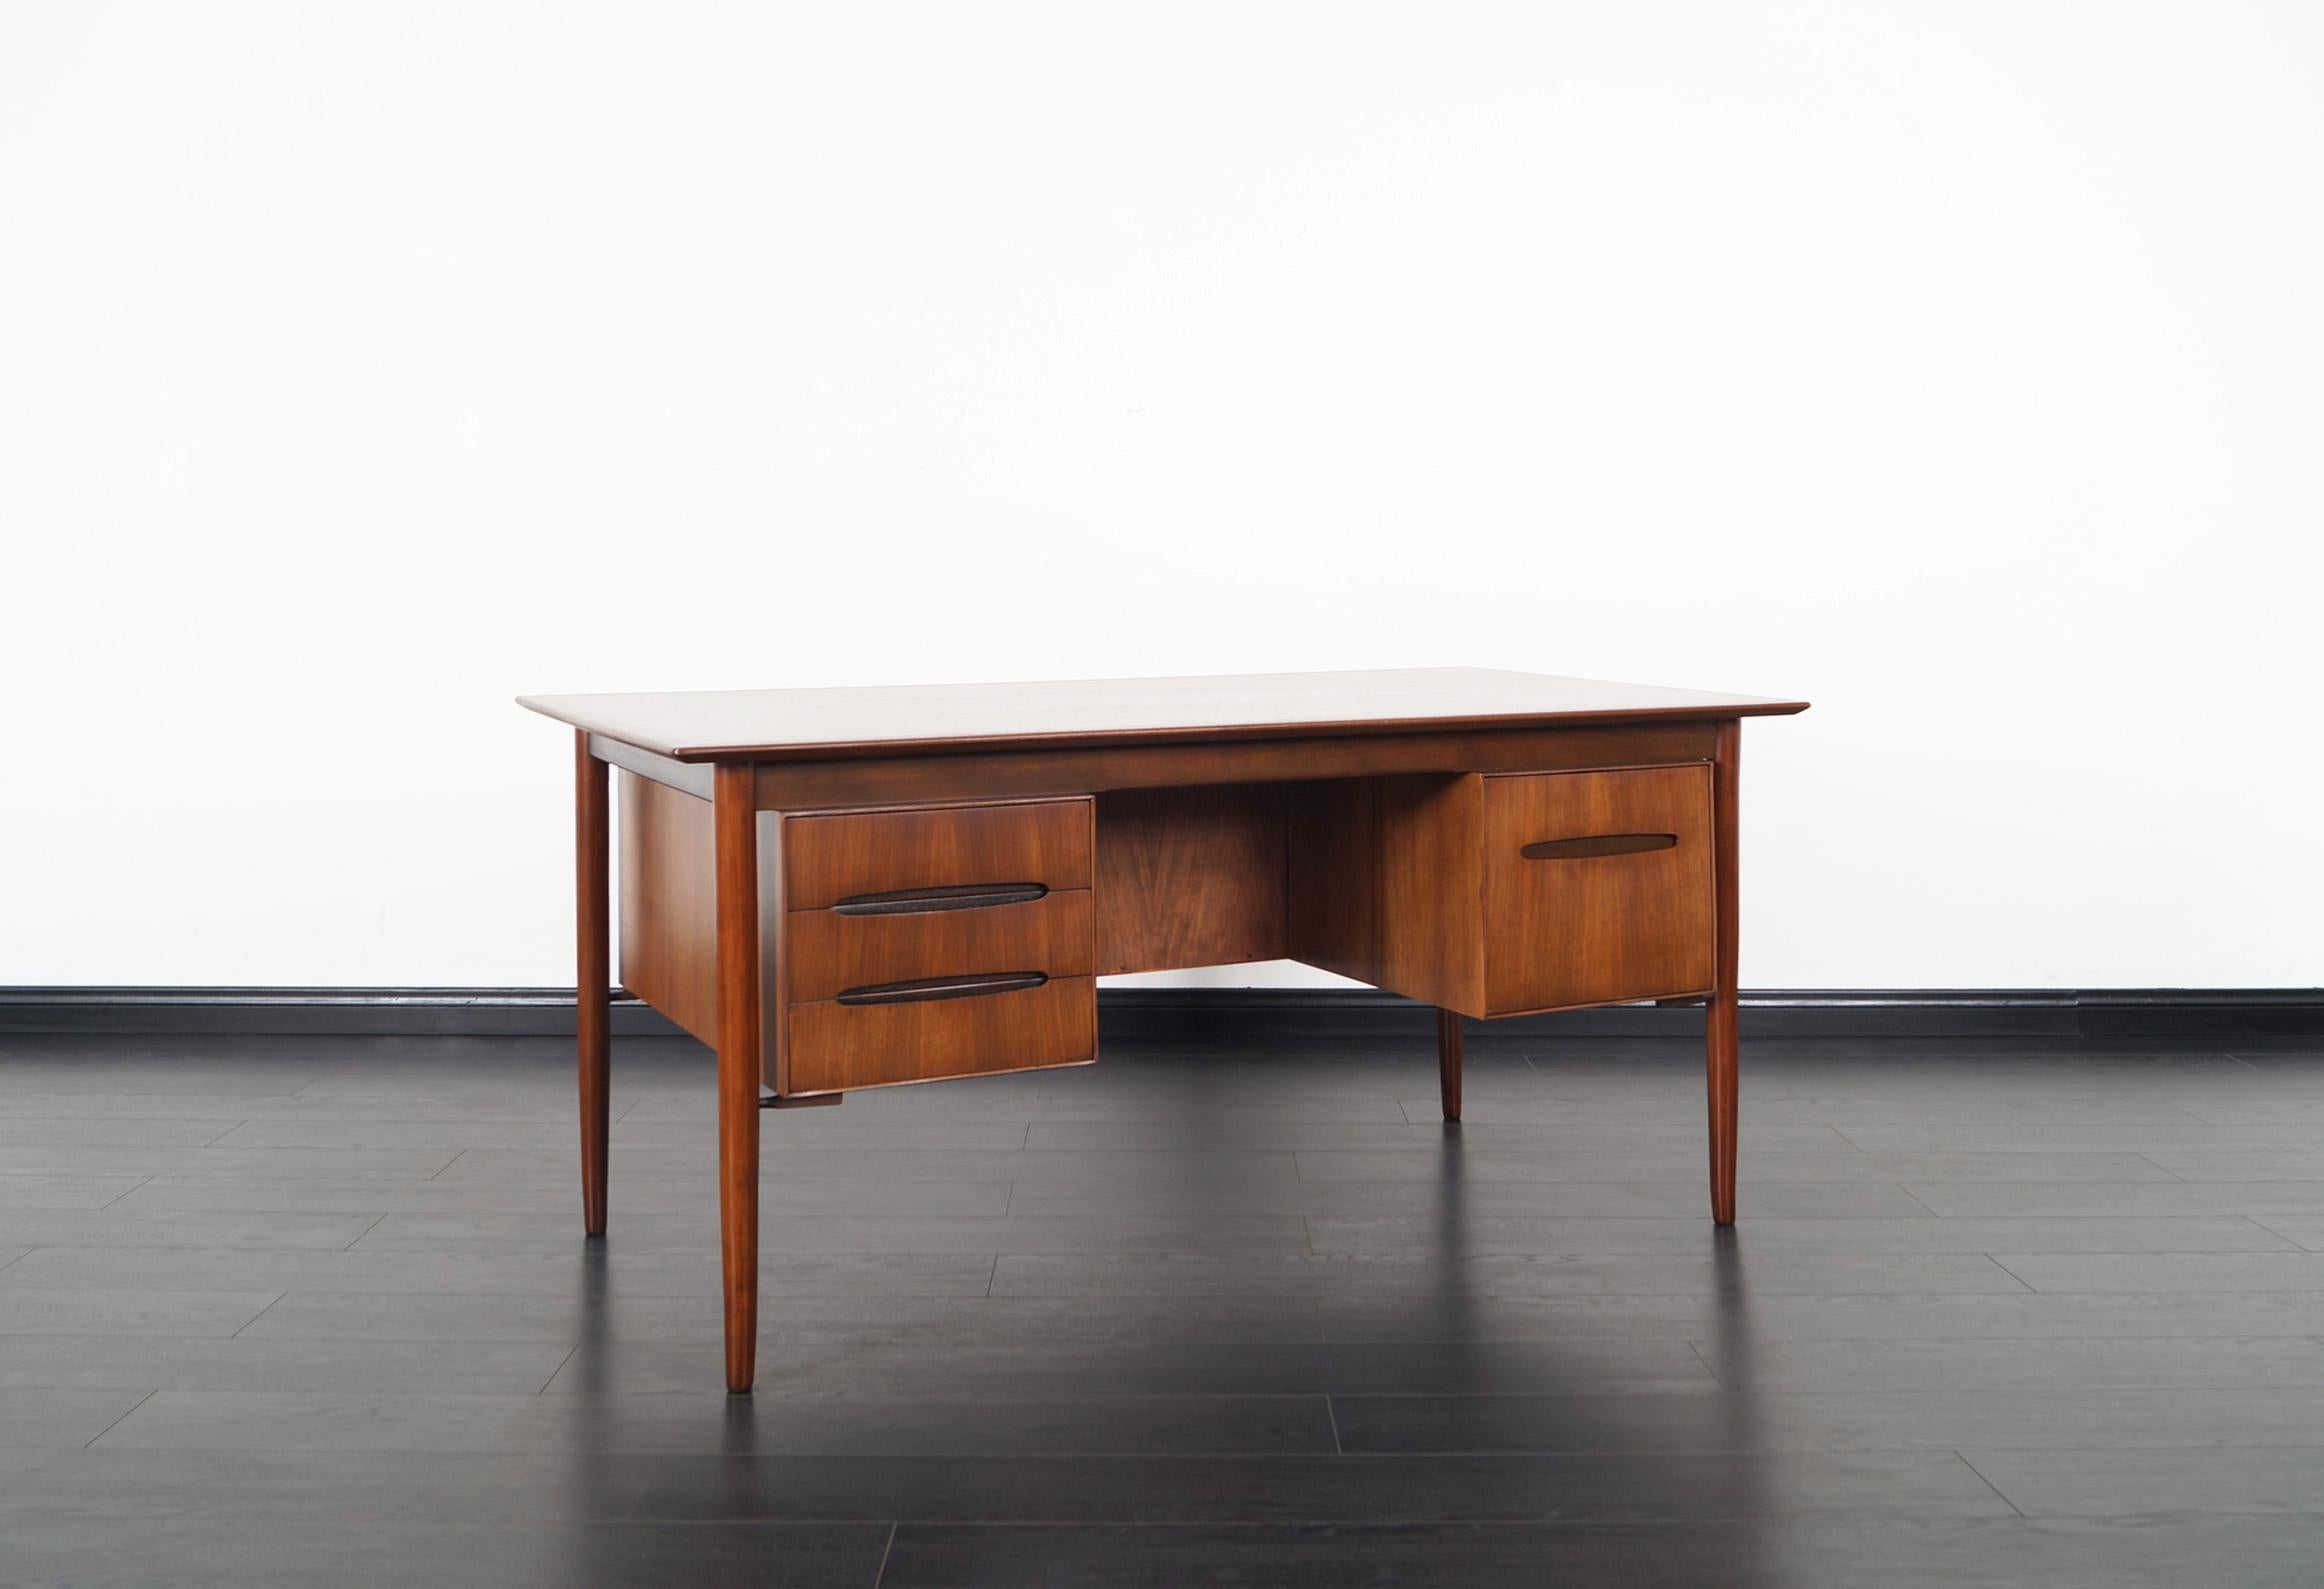 Danish modern walnut desk was designed by Ib Kofod Larsen for Selig. Features three drawers on the left side and one file drawer on the right side. Additional storage space on the back side. Original maker's mark.